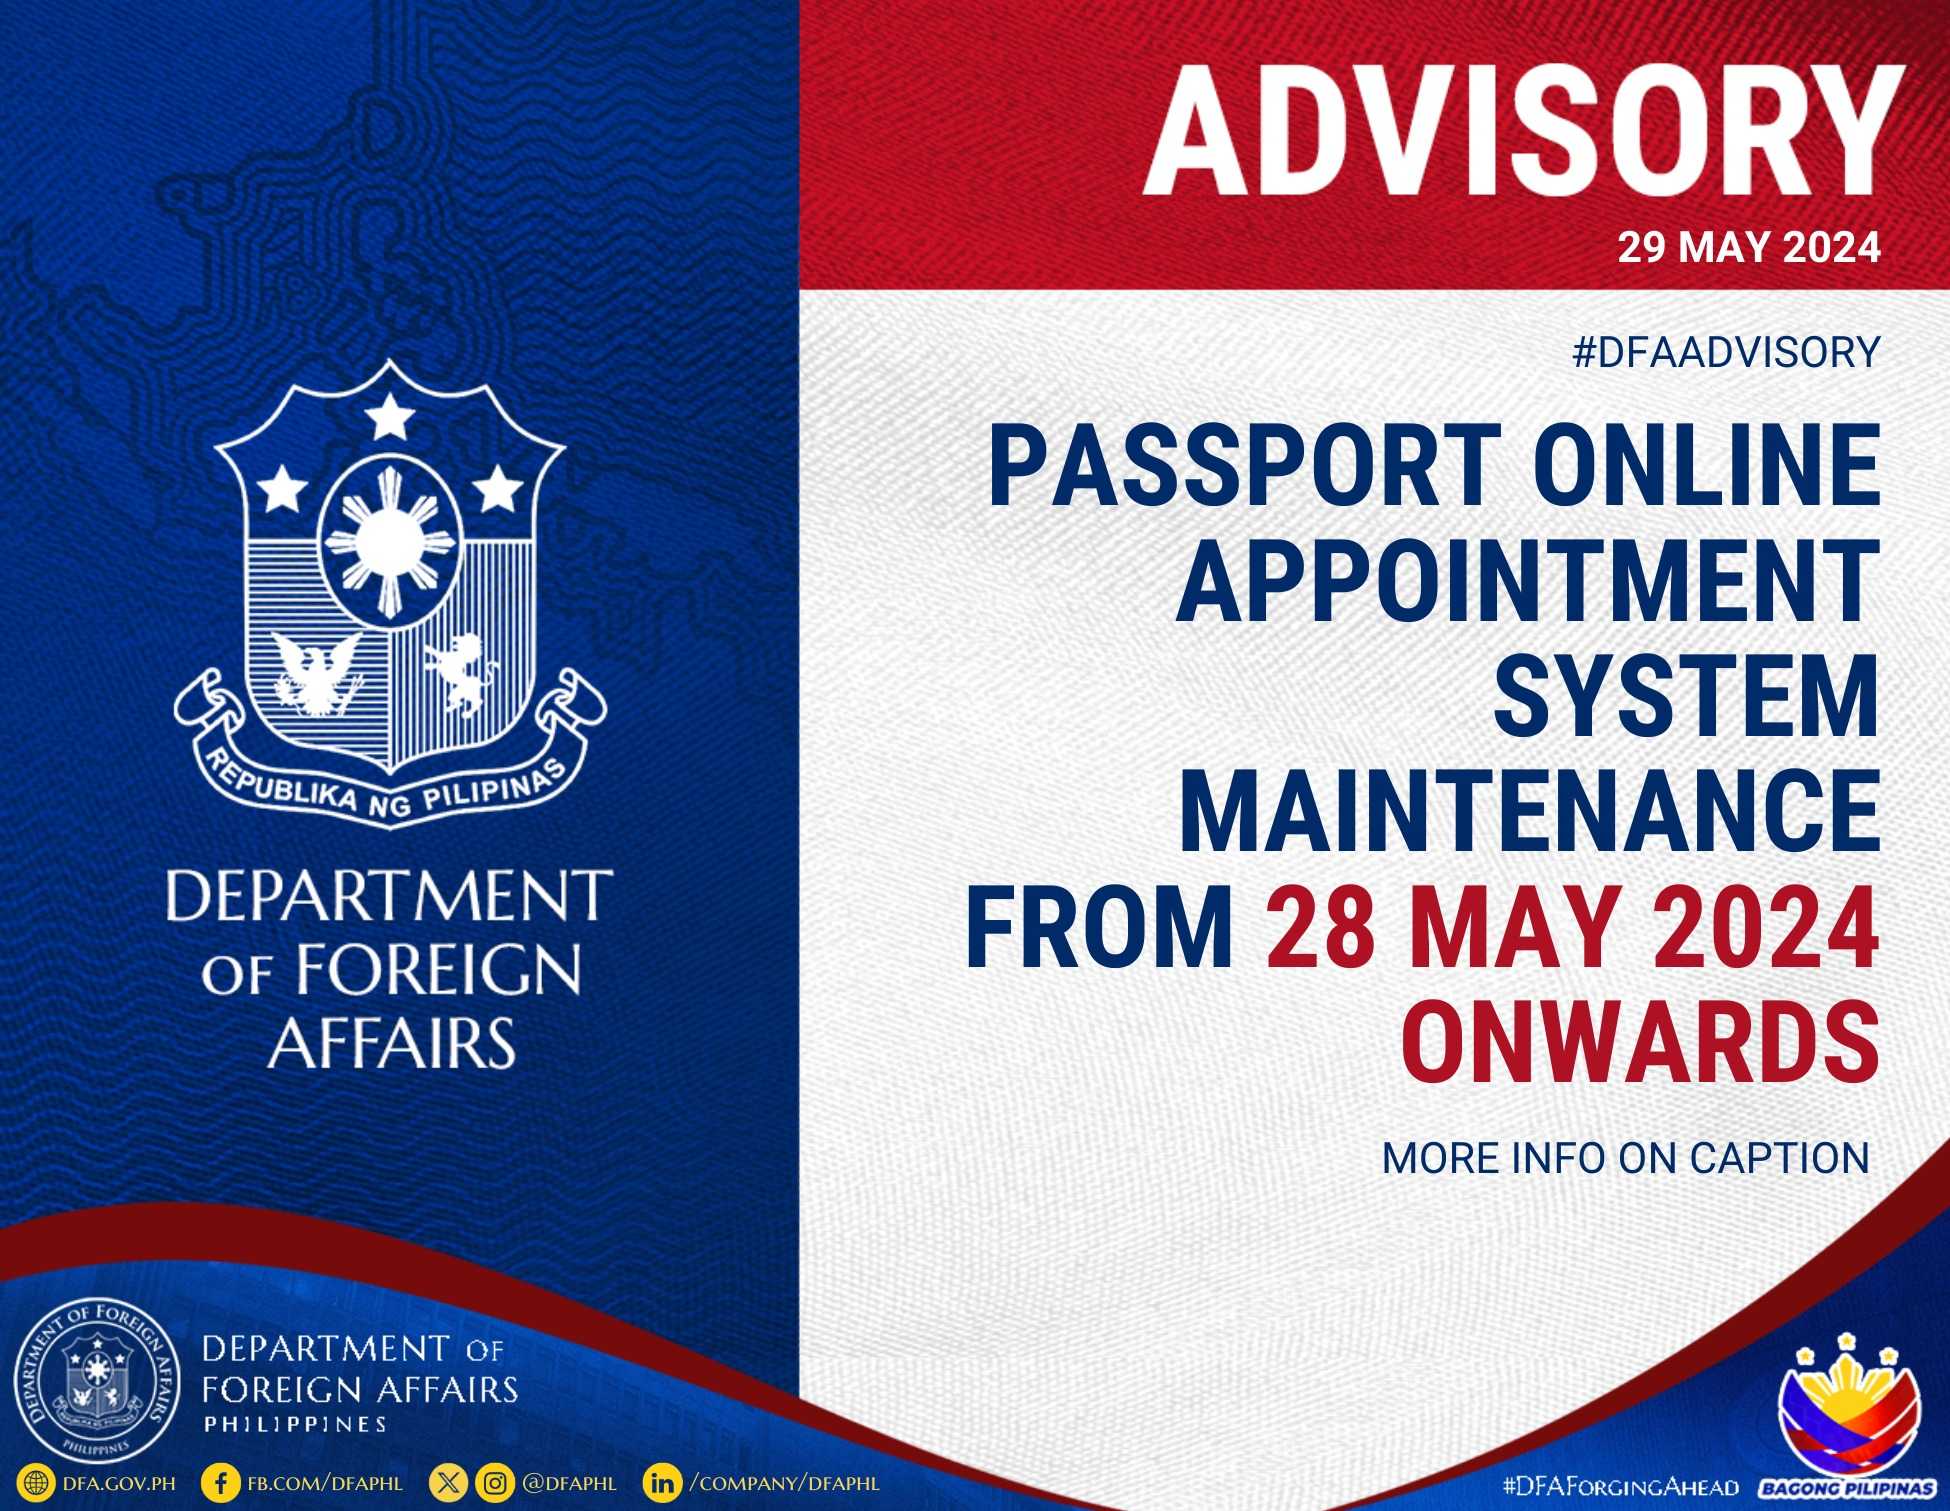 Passport Online Appointment System down starting 28 May 2024 onwards – DFA